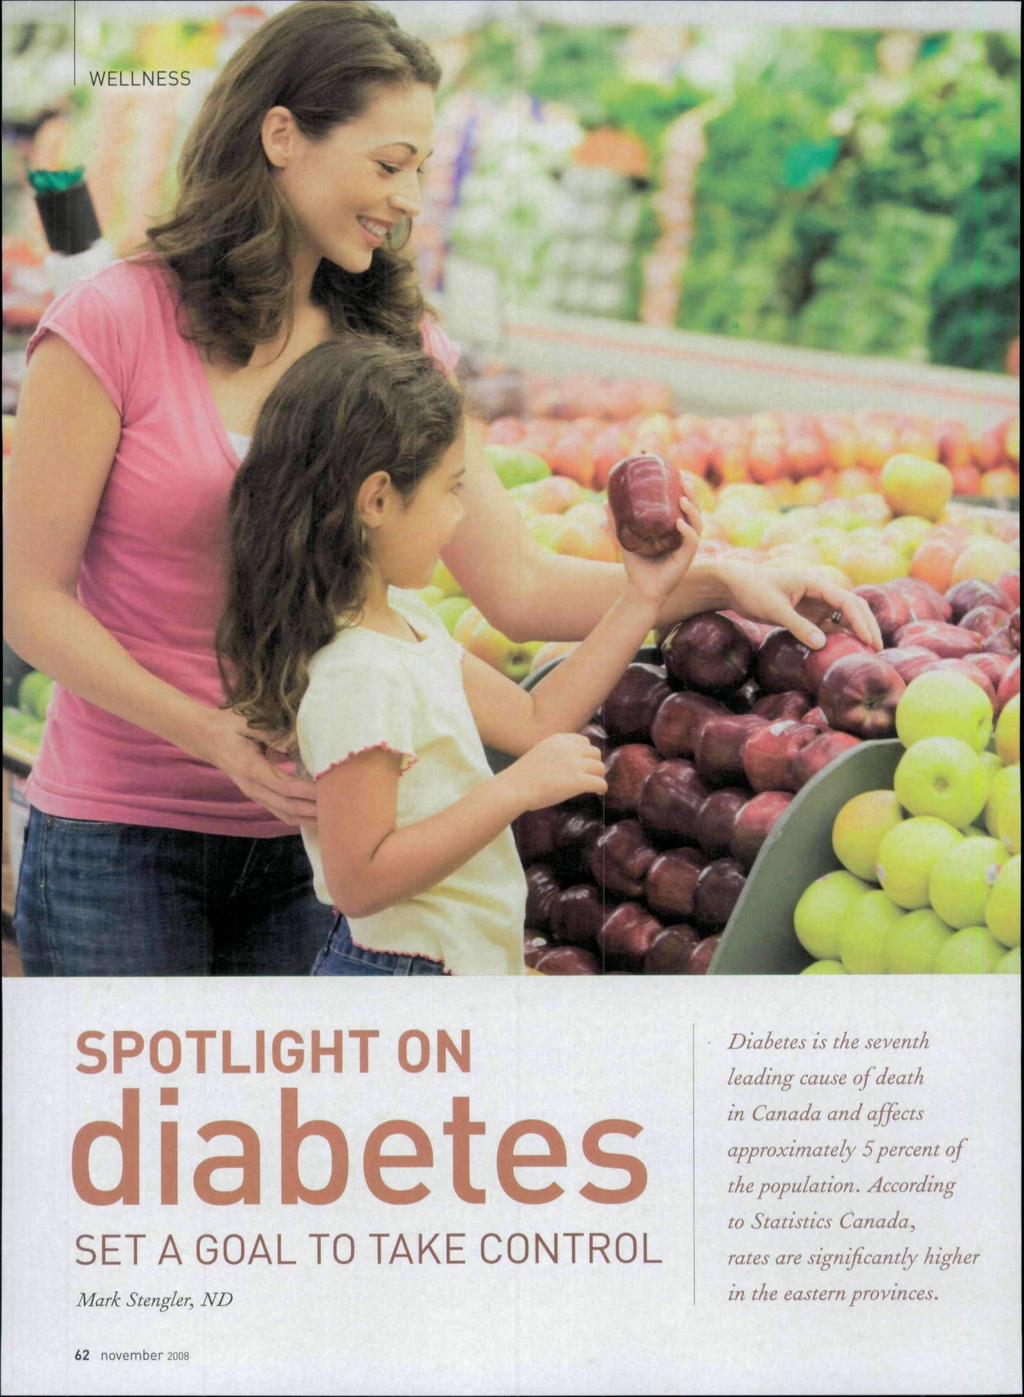 WELLNES5 SPOTLIGHT ON diabetes SET A GOAL TO TAKE CONTROL Mark Stengler, ND Diabetes is the seventh leading cause of death in Canada and affects